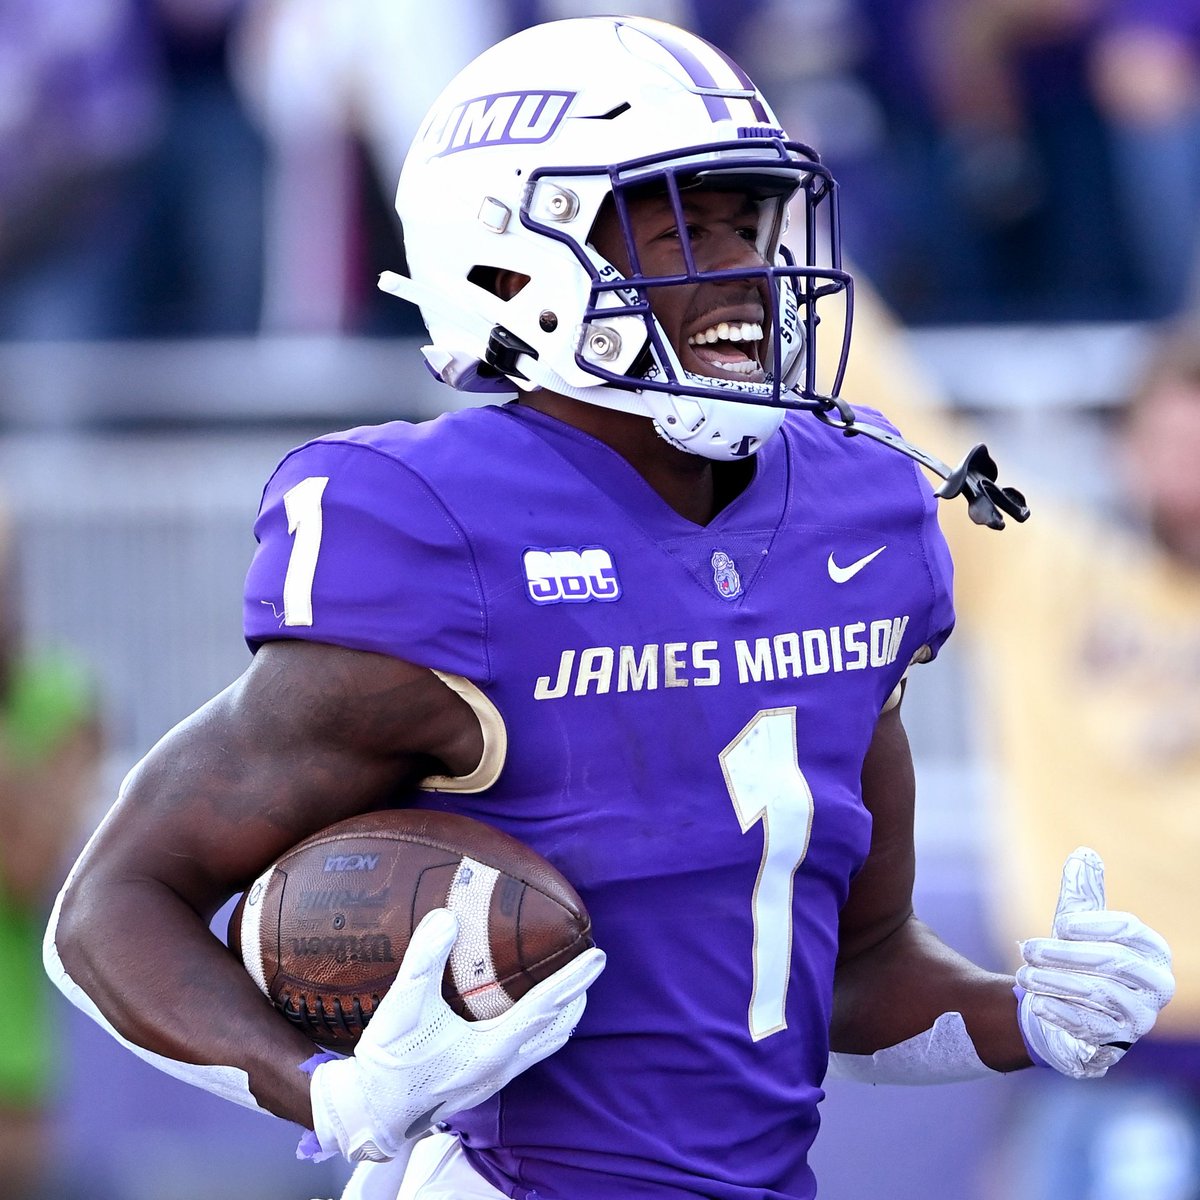 I caught up with former James Madison WR Reggie Brown as he's agreed to a rookie free agent contract with the Kansas City Chiefs. 🔊 on.soundcloud.com/cybNTwzudihC9n… @JMUFootball | @1rlbjr_ | #ProDukes